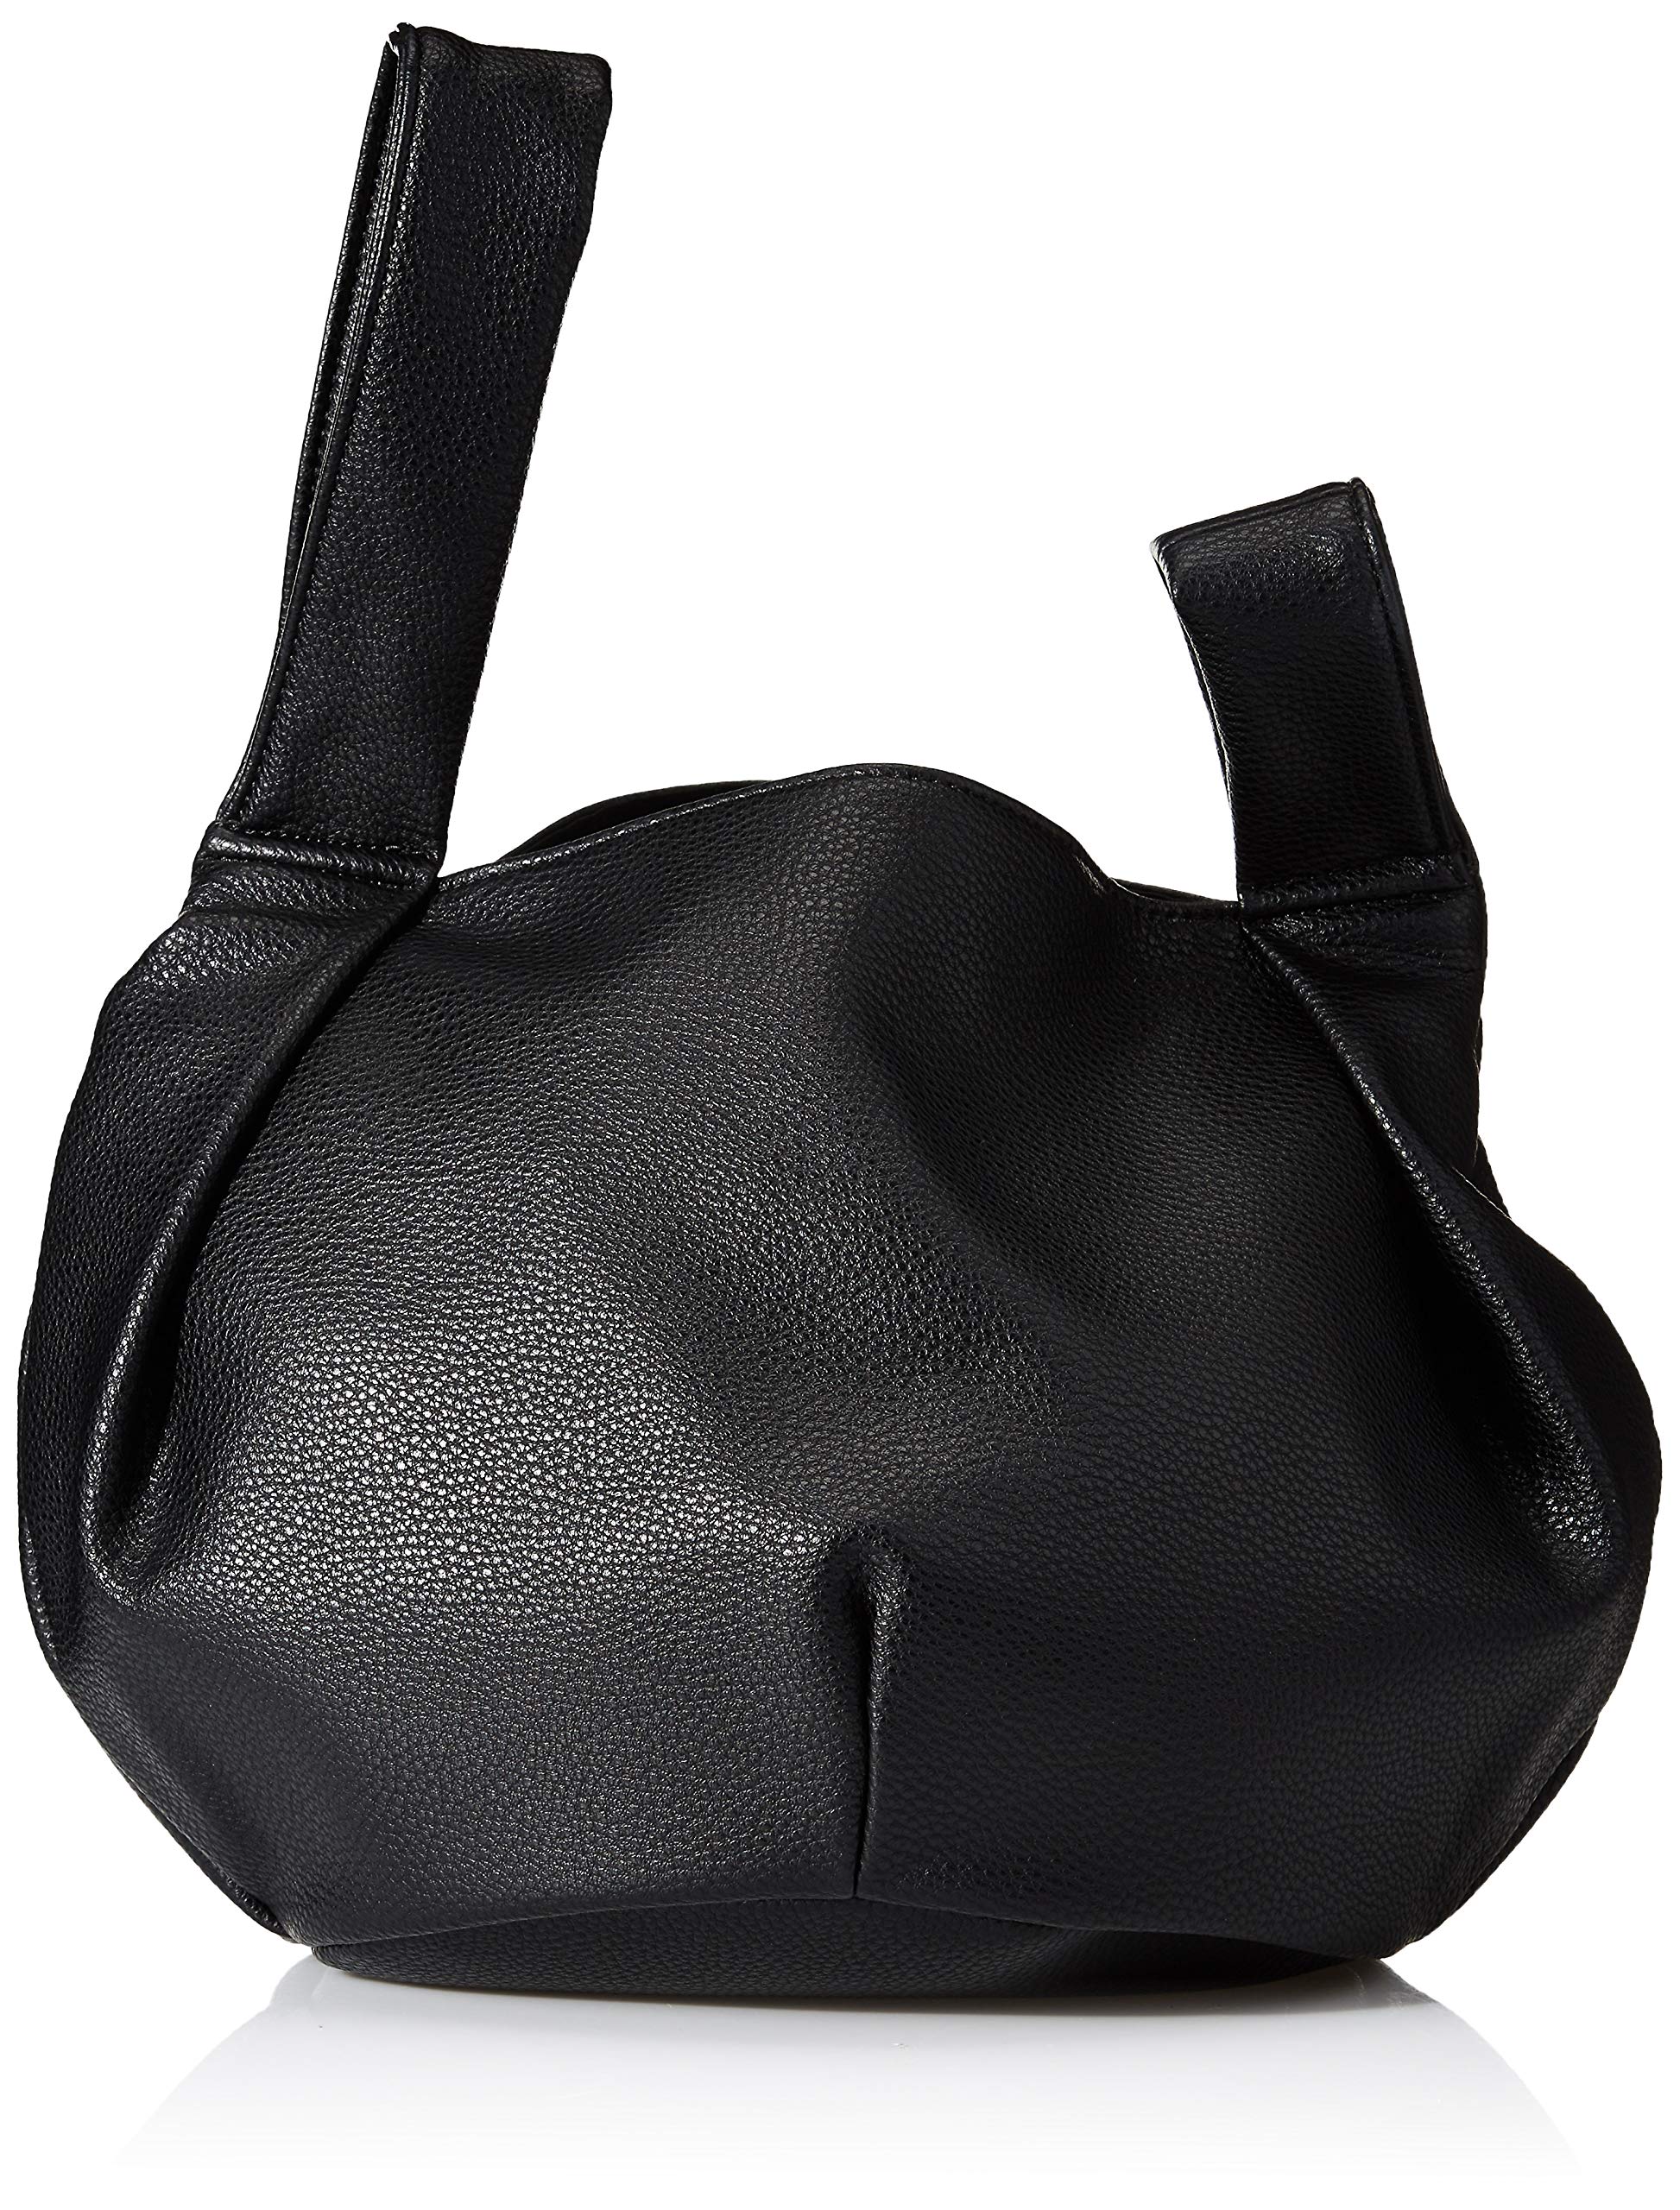 The Drop Women's Avalon Small Tote Bag